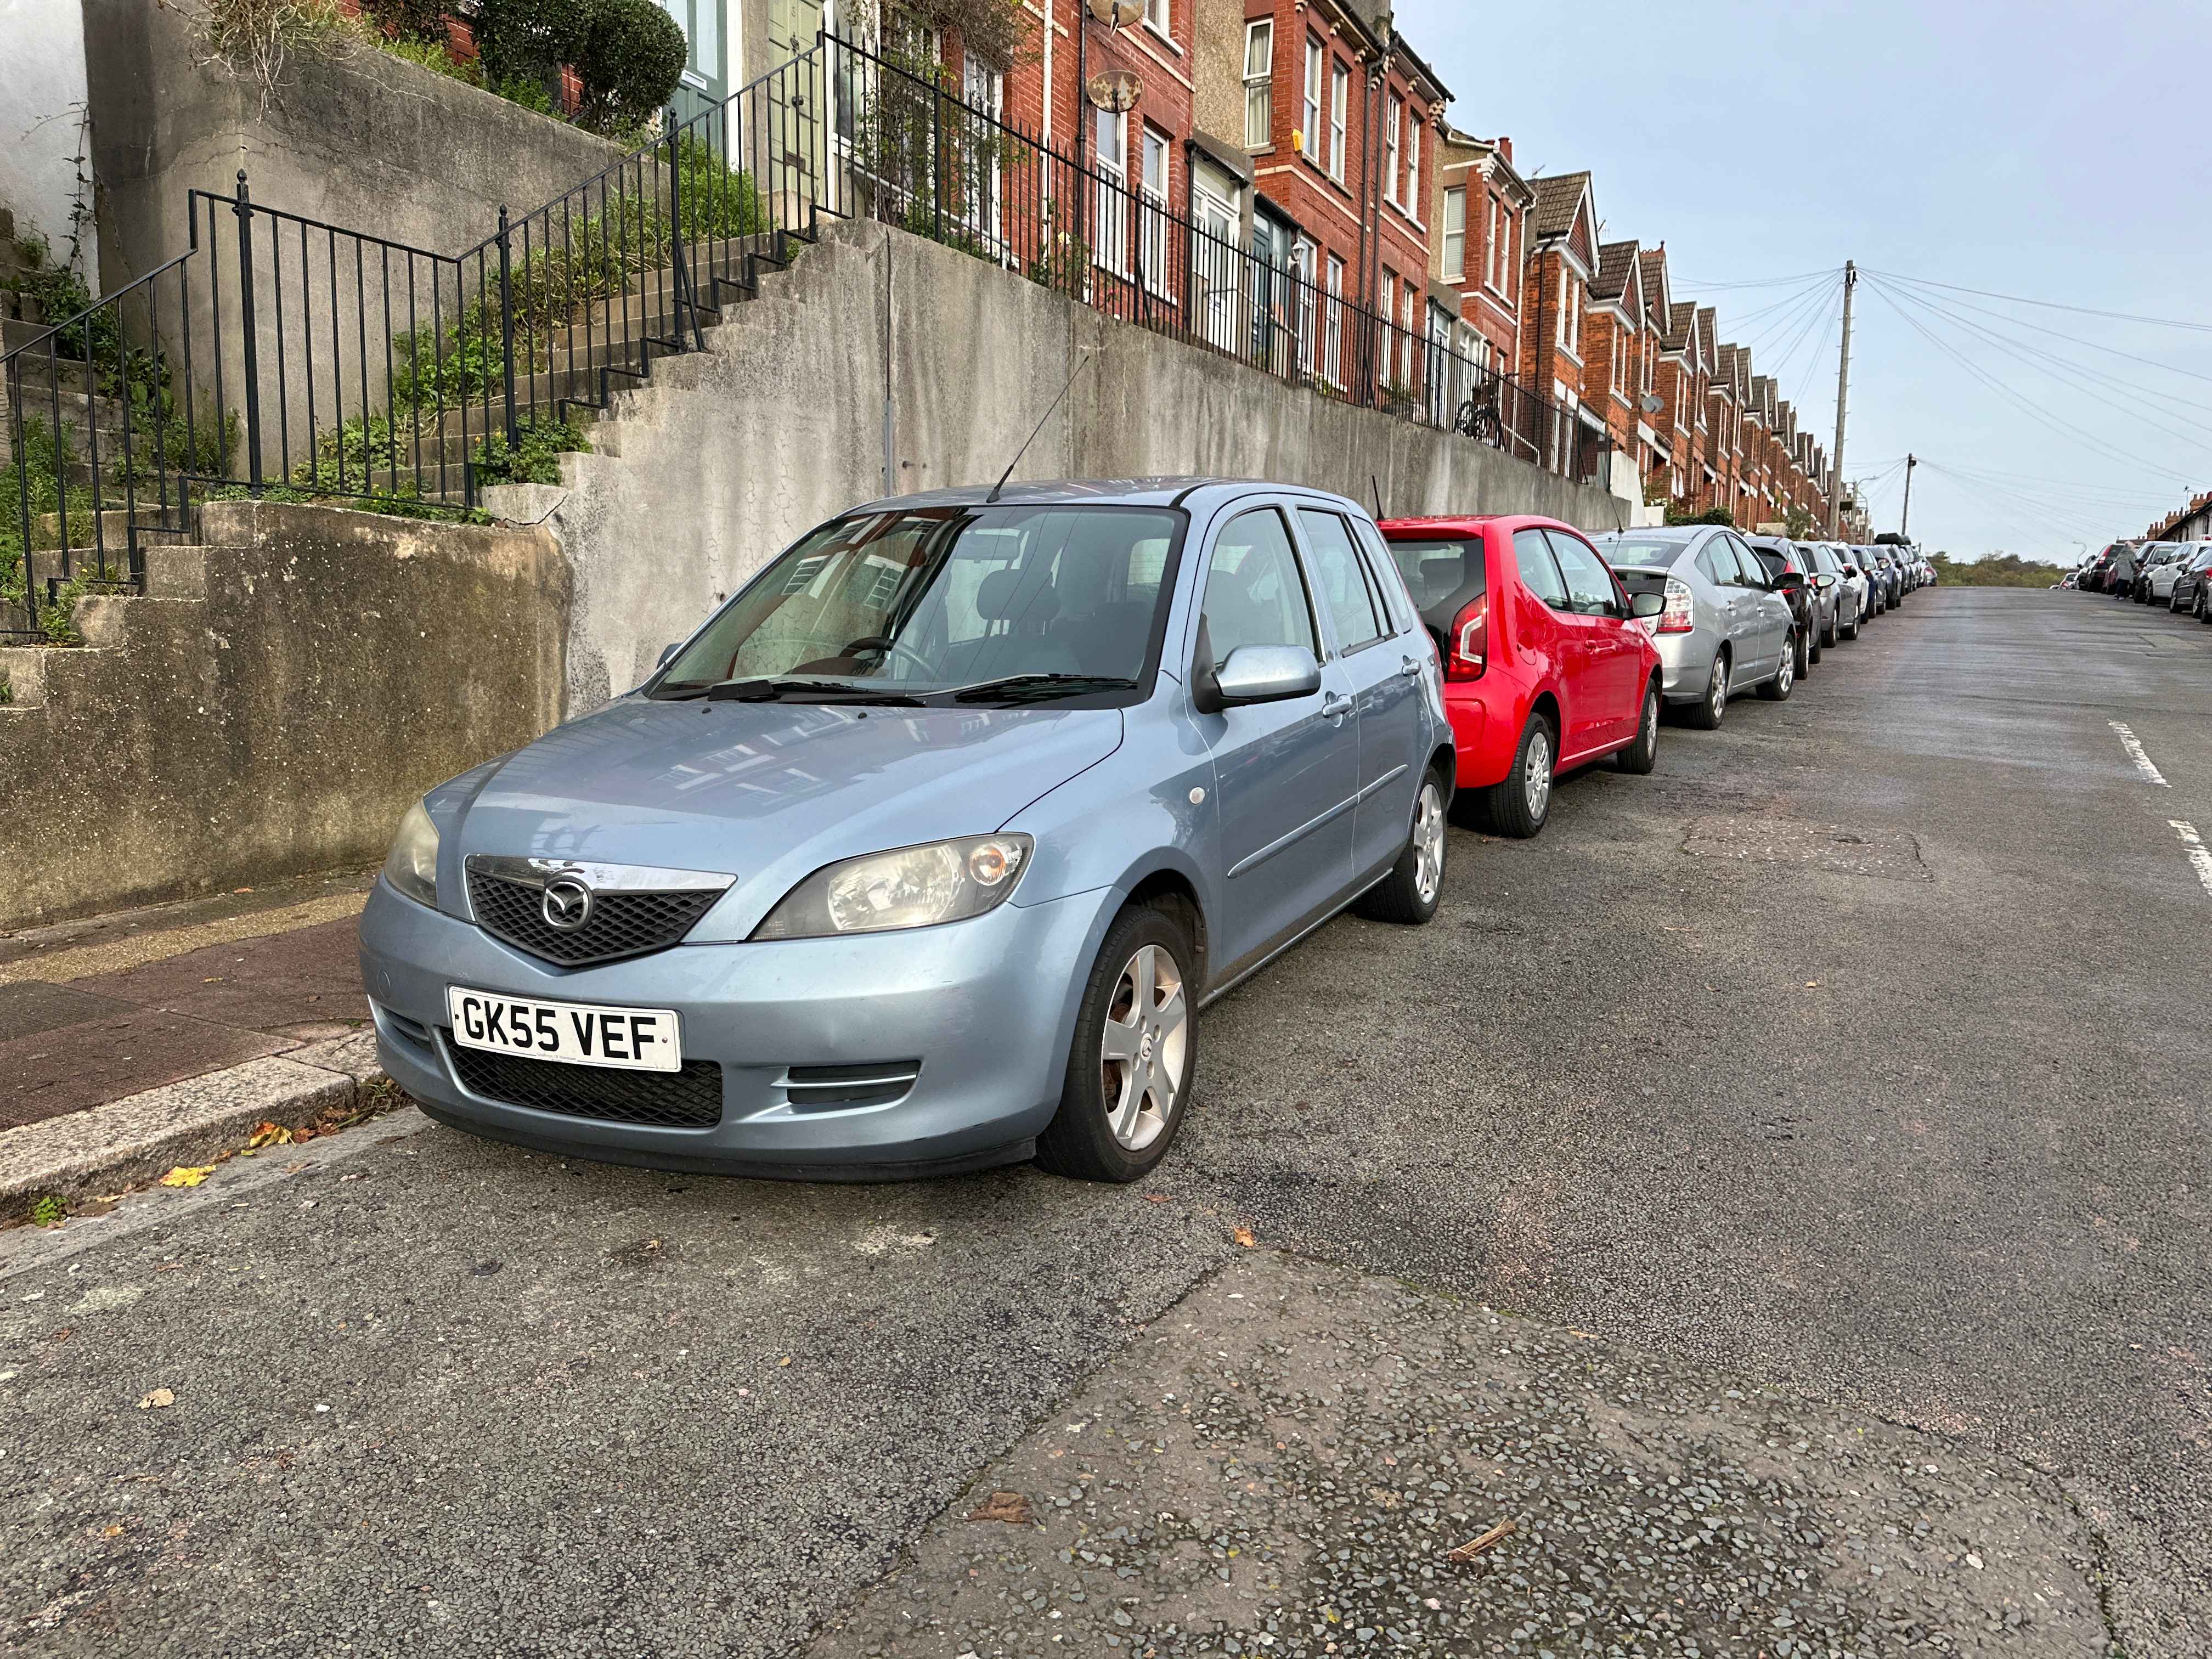 Photograph of GK55 VEF - a Silver Mazda 2 parked in Hollingdean by a non-resident. The seventh of nine photographs supplied by the residents of Hollingdean.